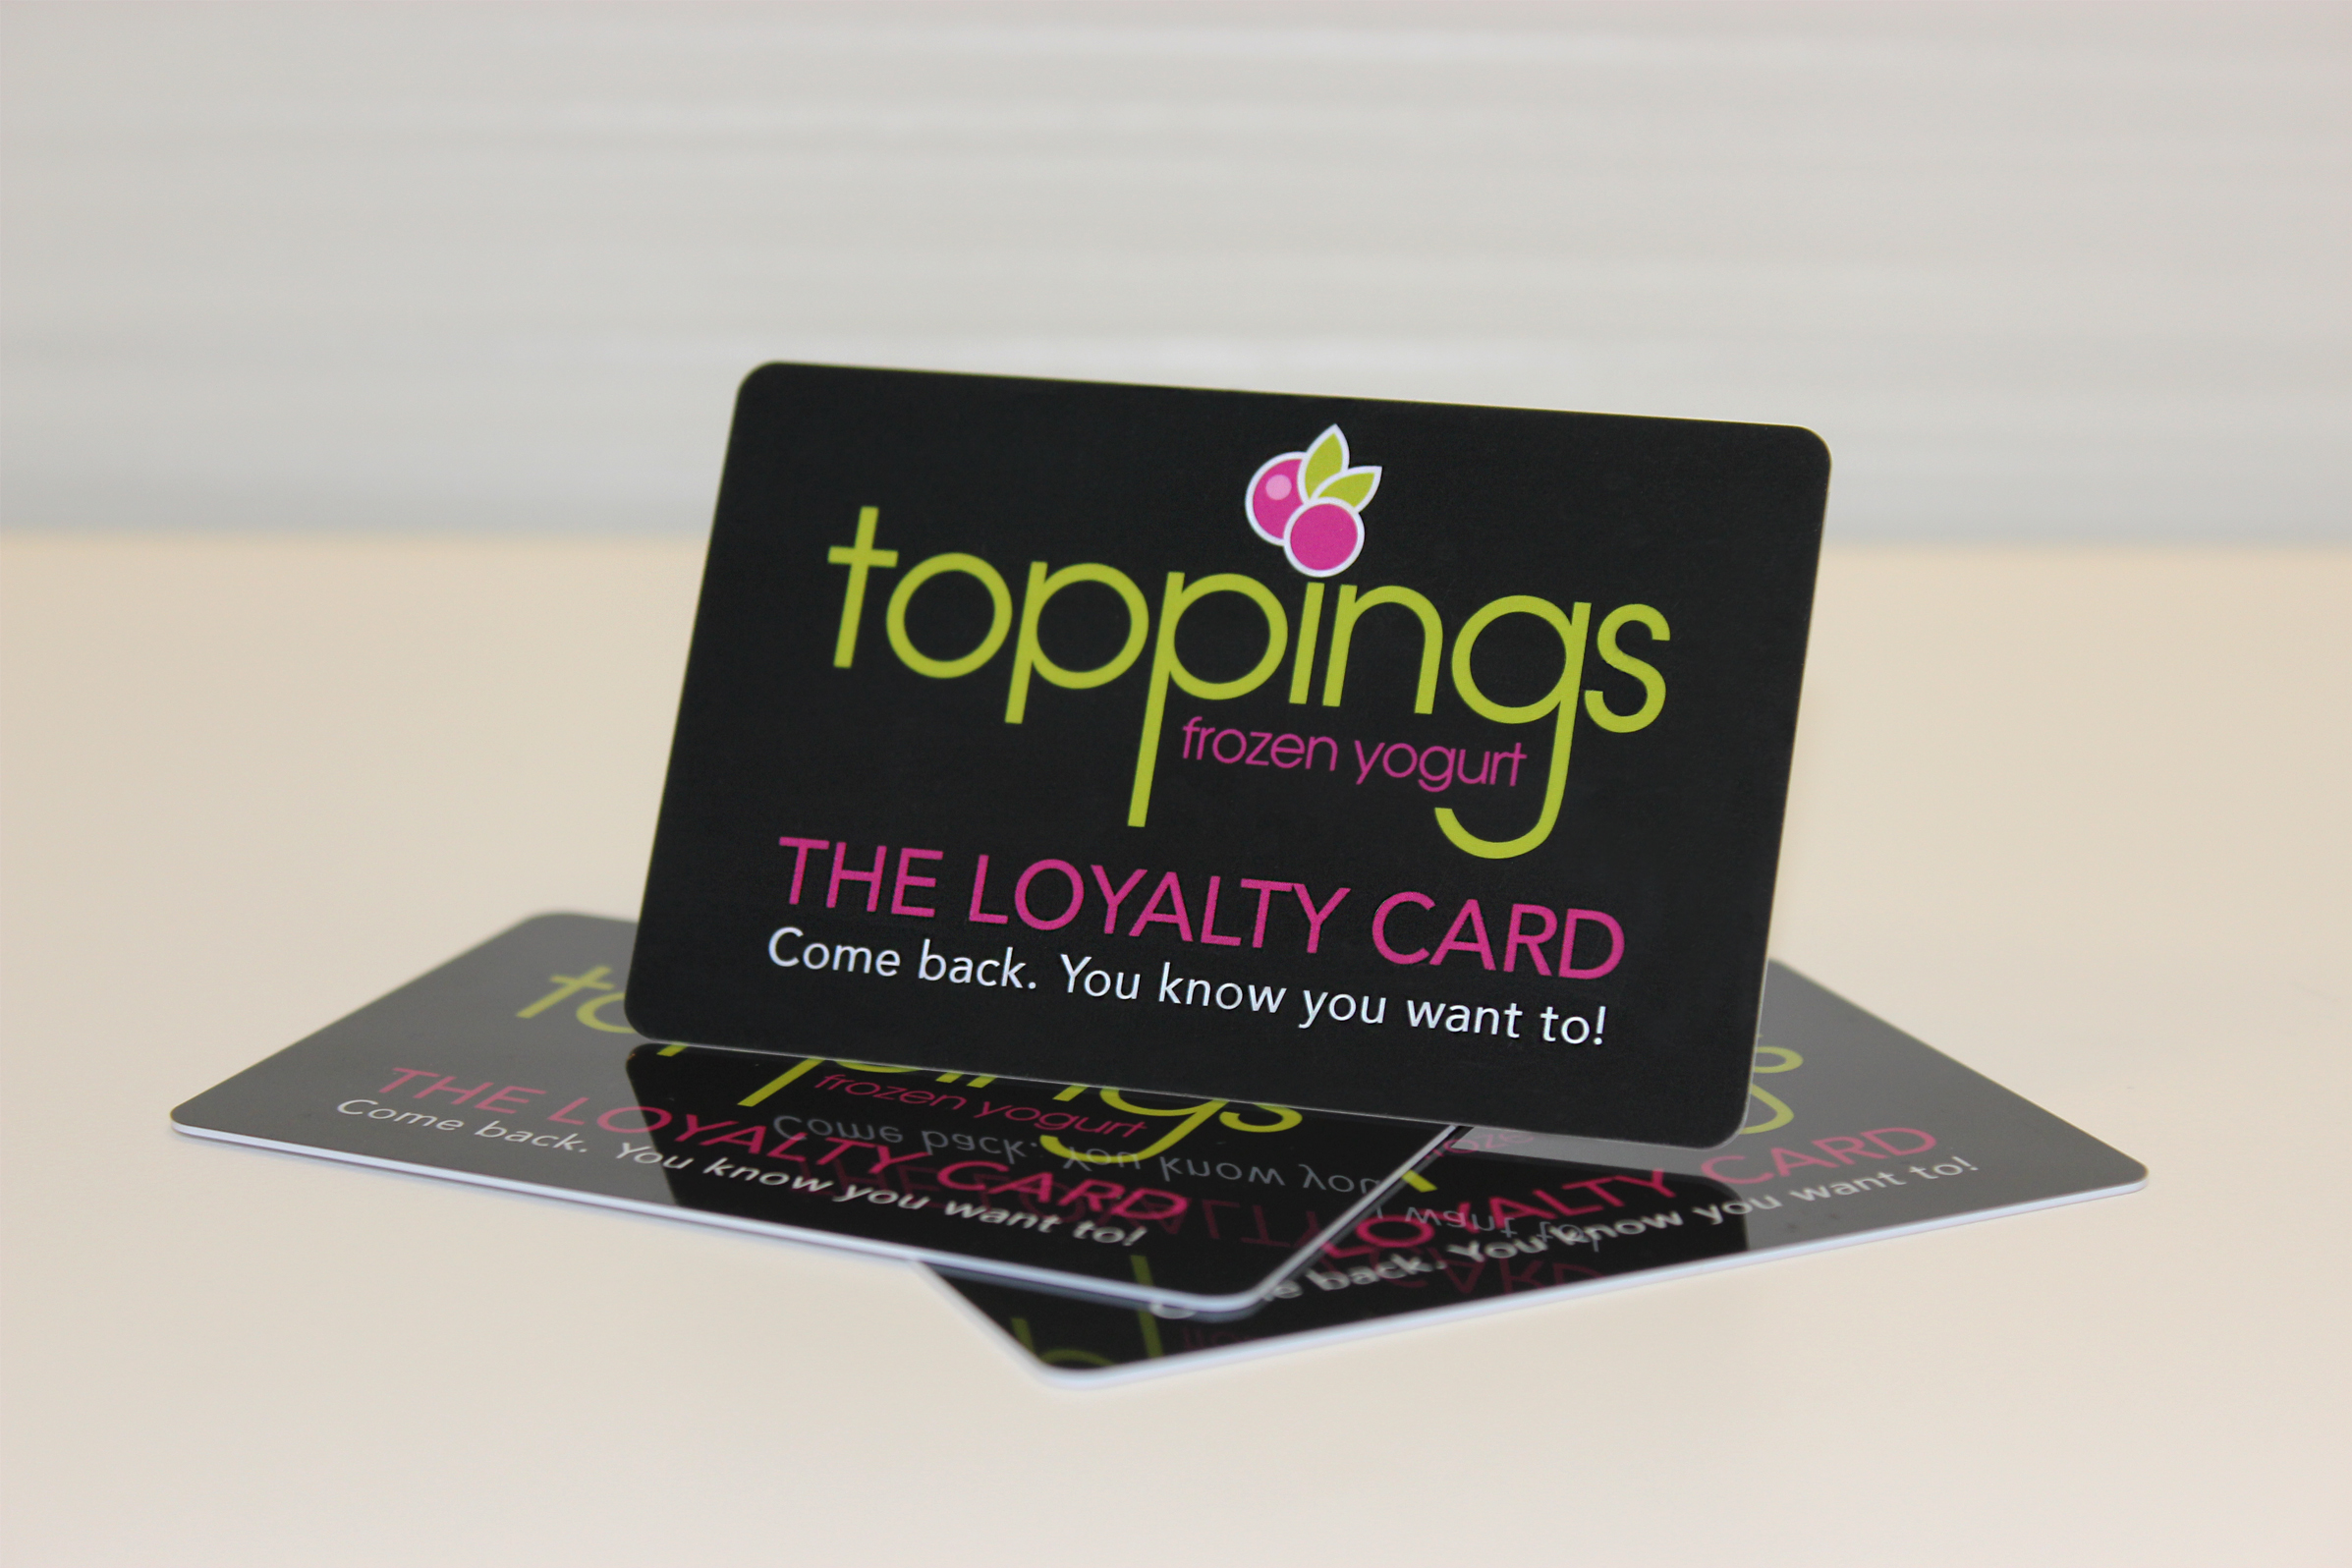 What Are The Loyalty Card